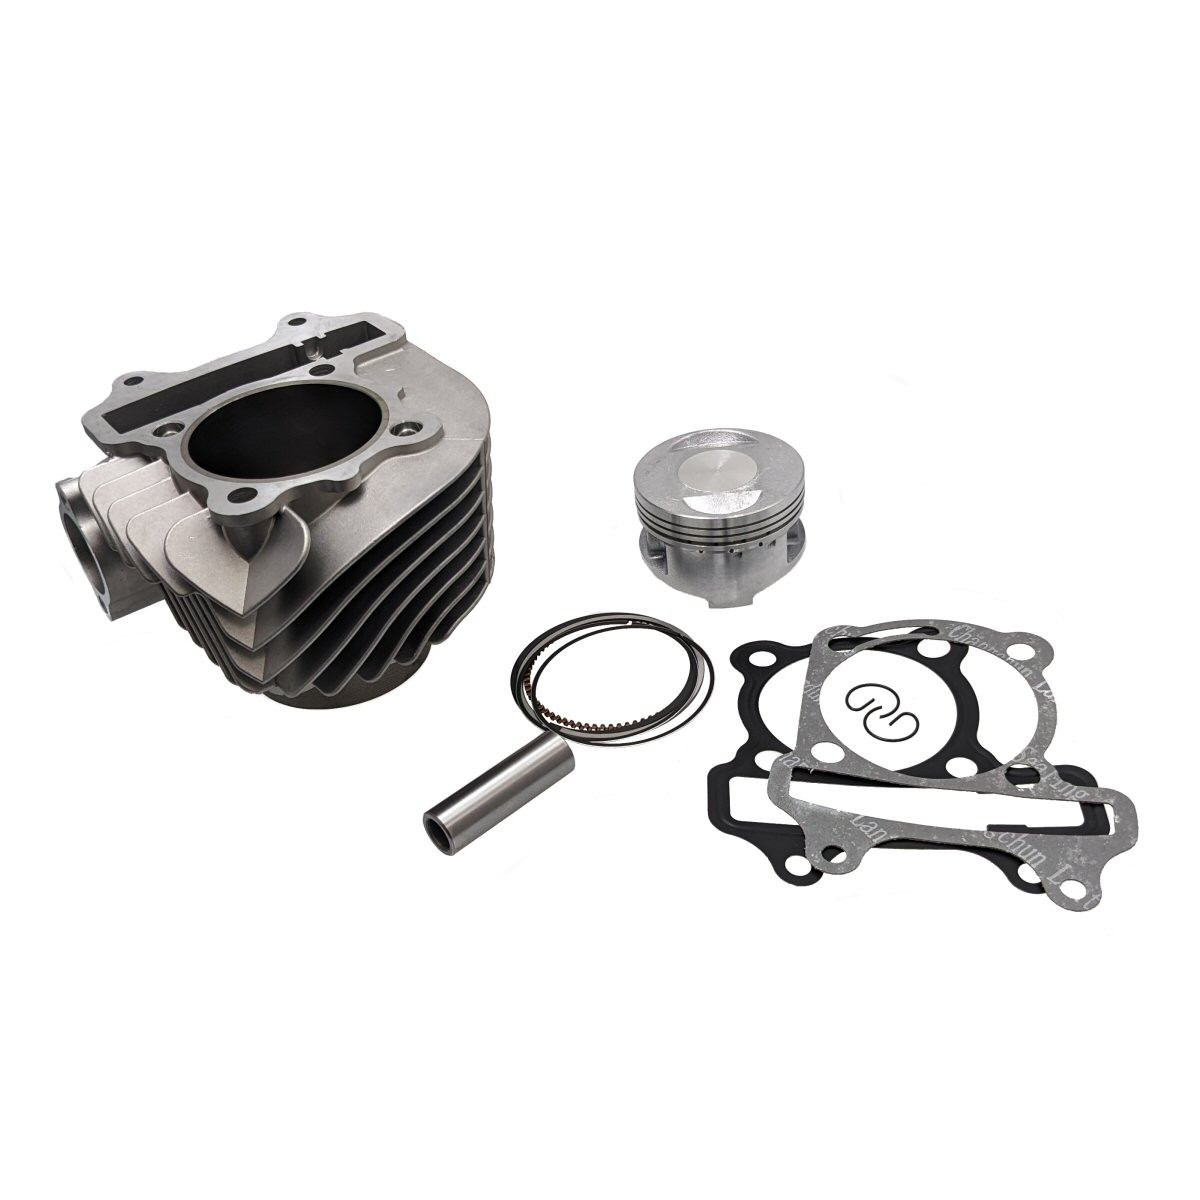 Universal Parts GY6 “200cc” 61mm Cylinder Kit for Buggies and ATVs       “QMK MOTORS”